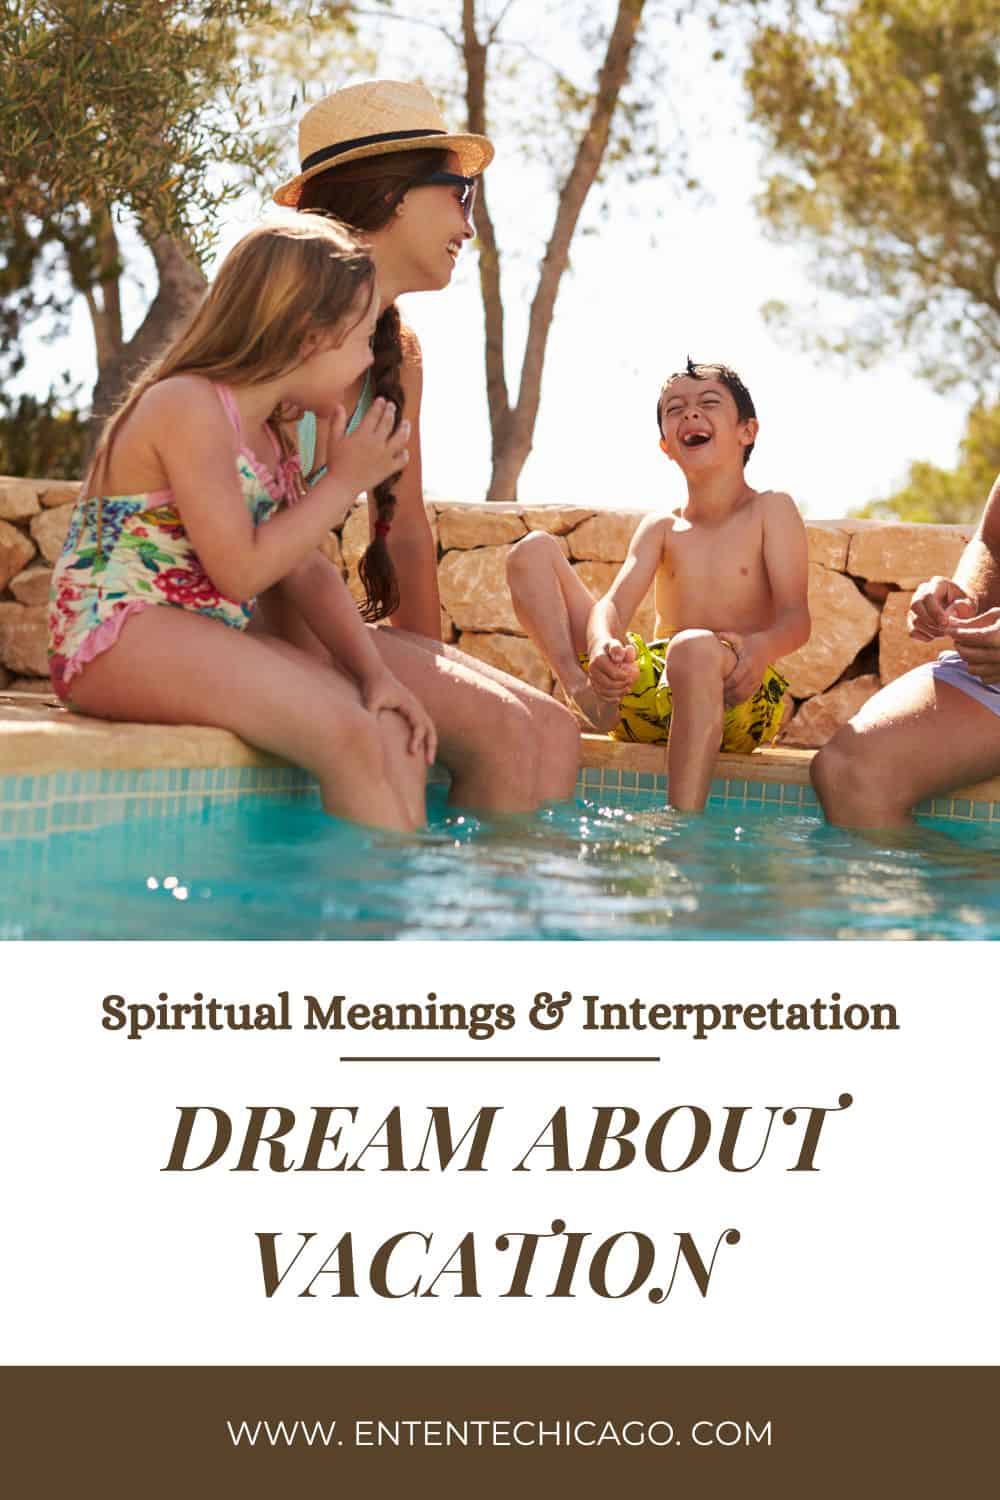 Dream About Vacation (Spiritual Meanings & Interpretation)